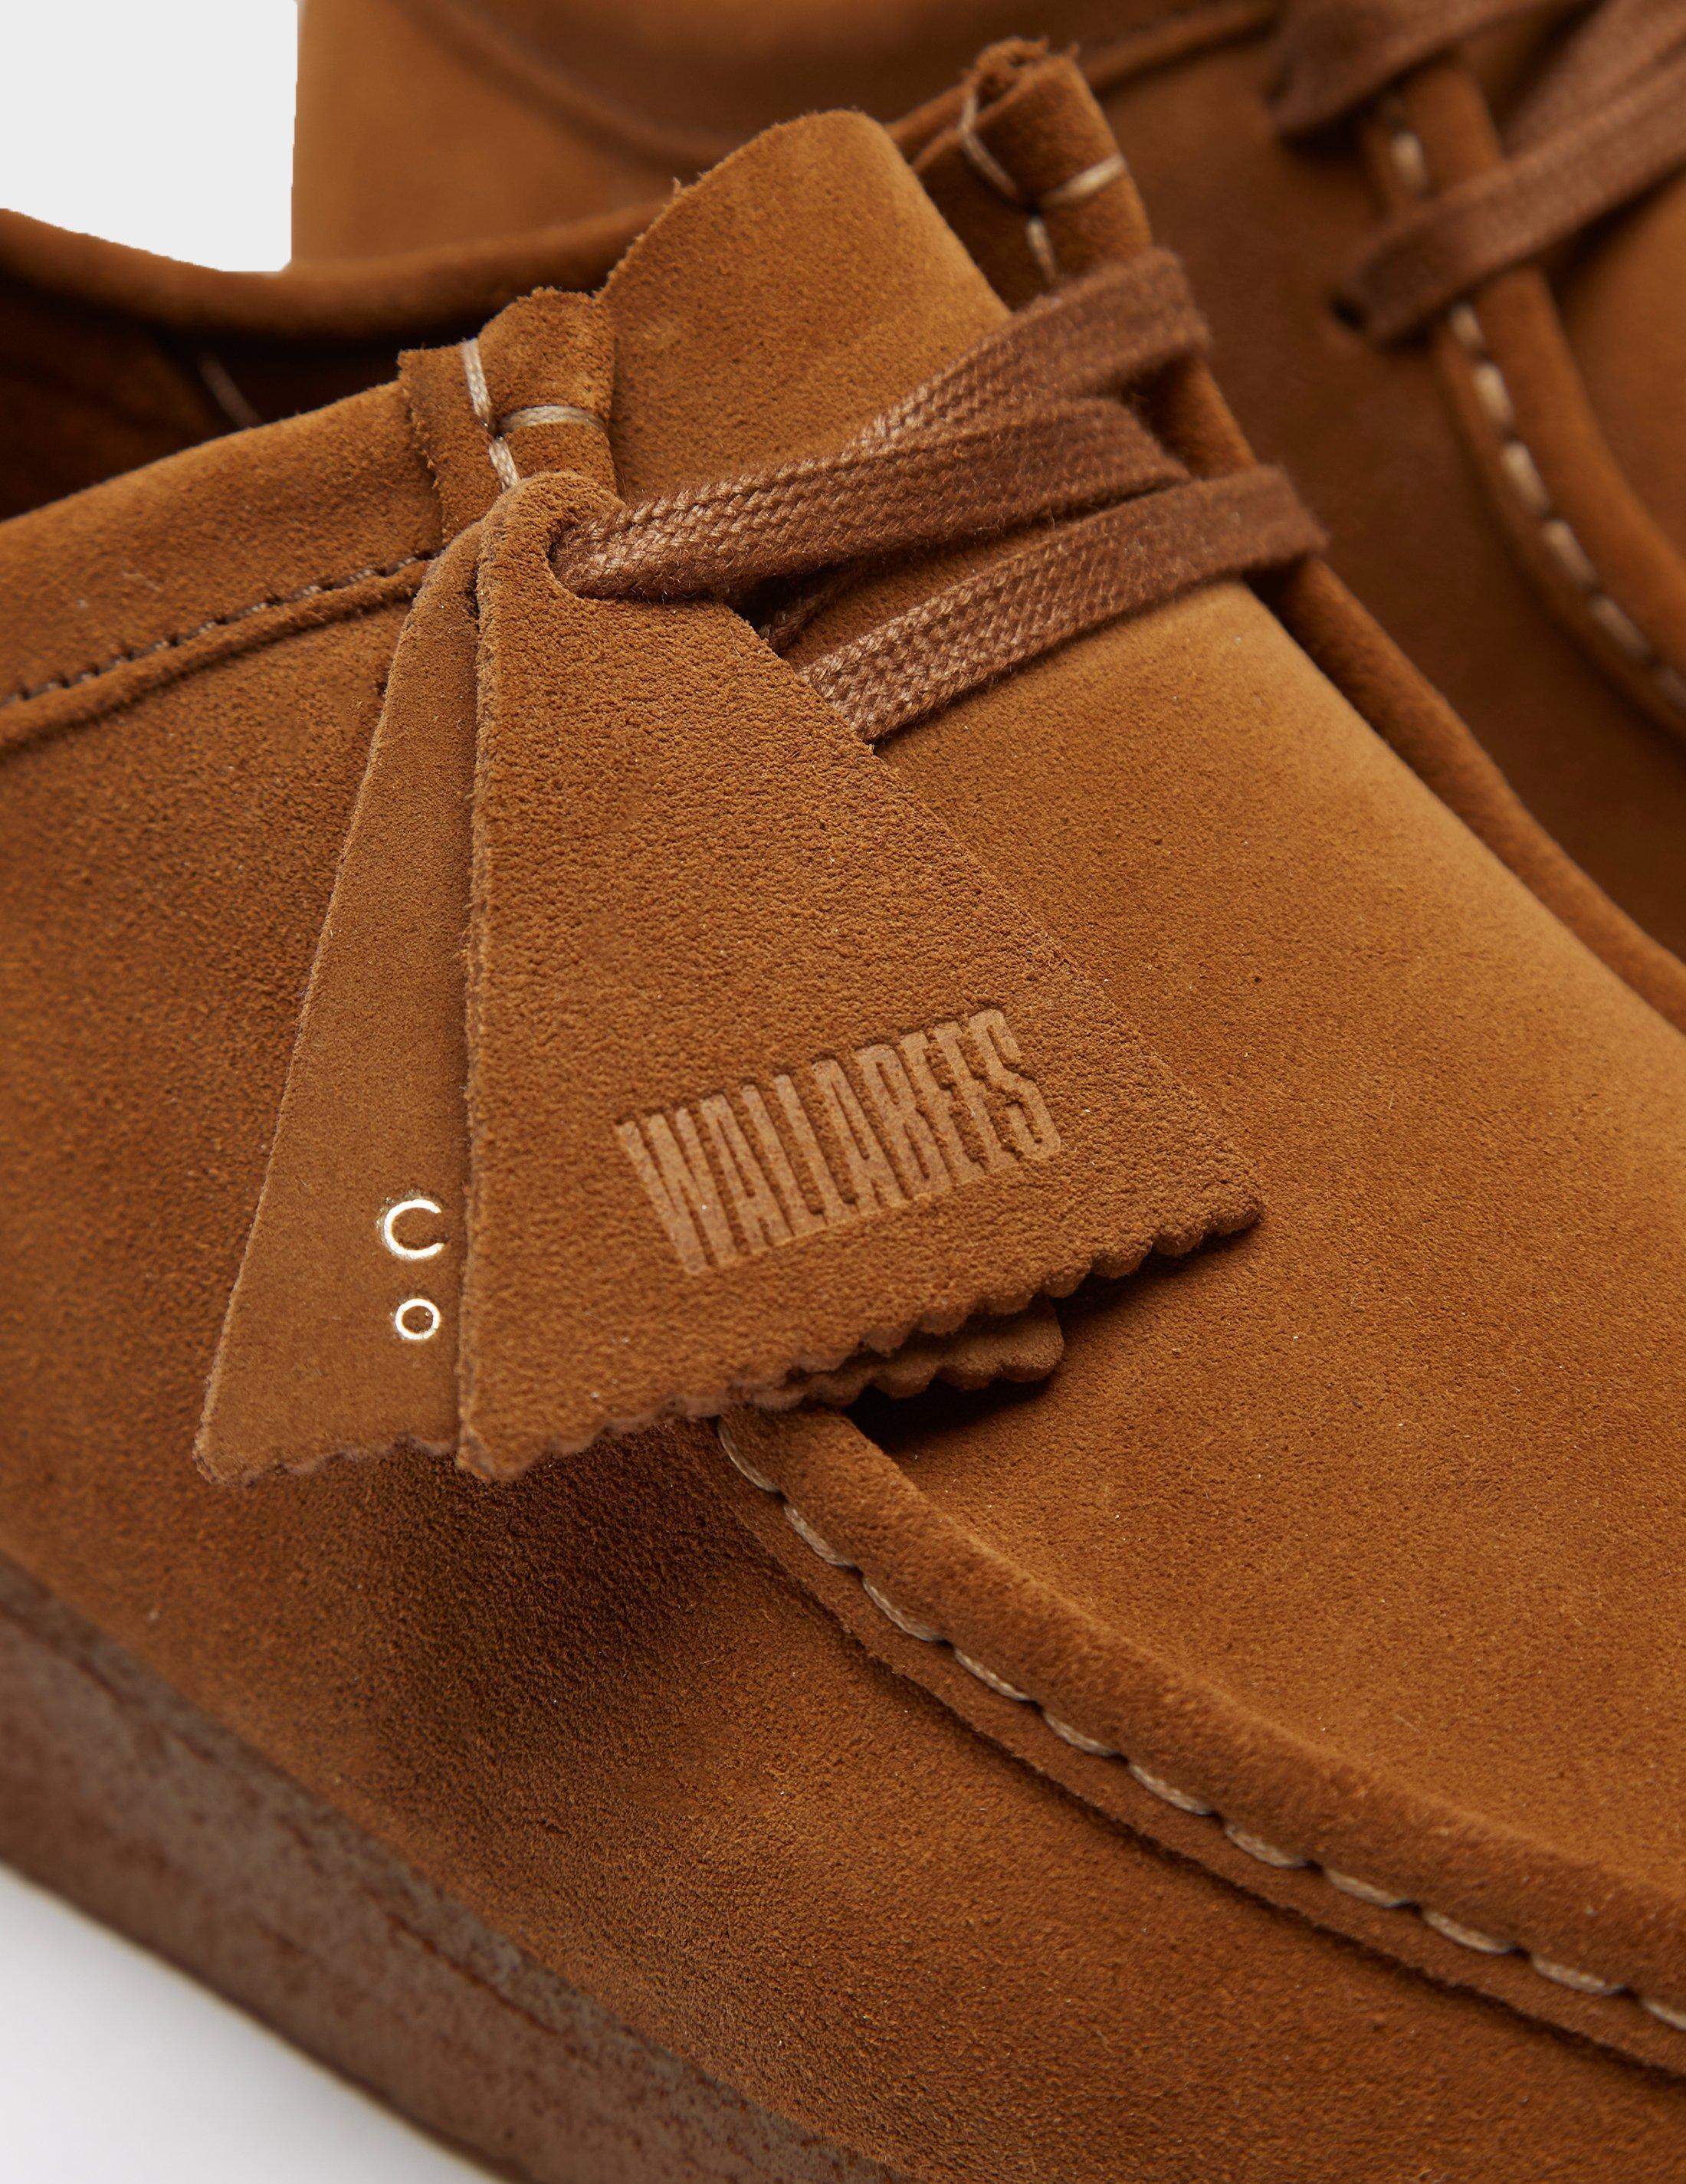 Clarks Suede Wallabee Brown/cola for Men - Save 51% | Lyst